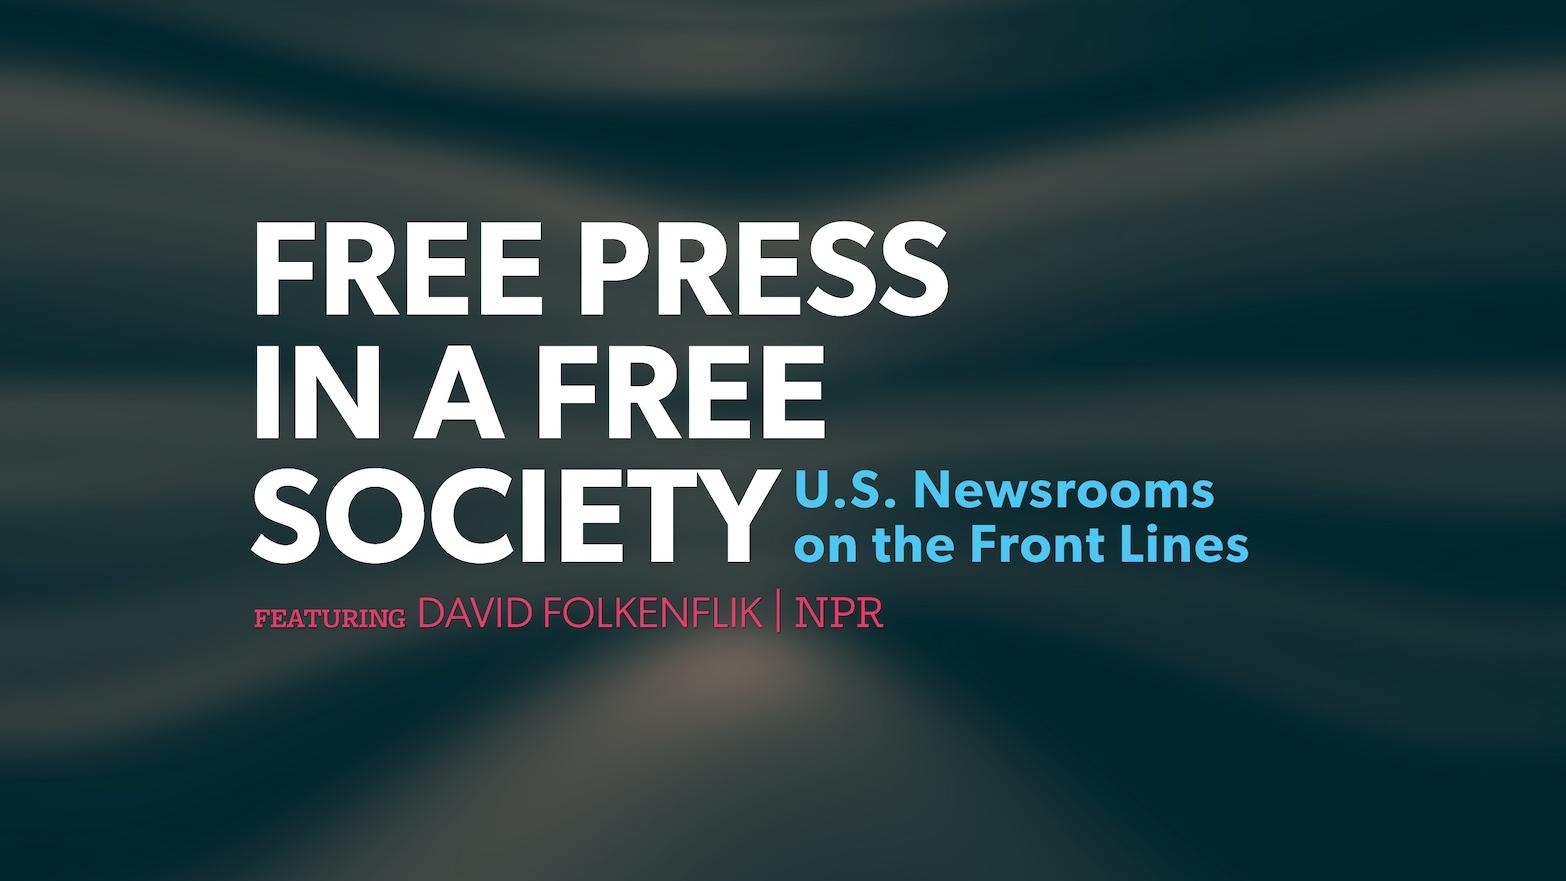 Free Press in a Free Society